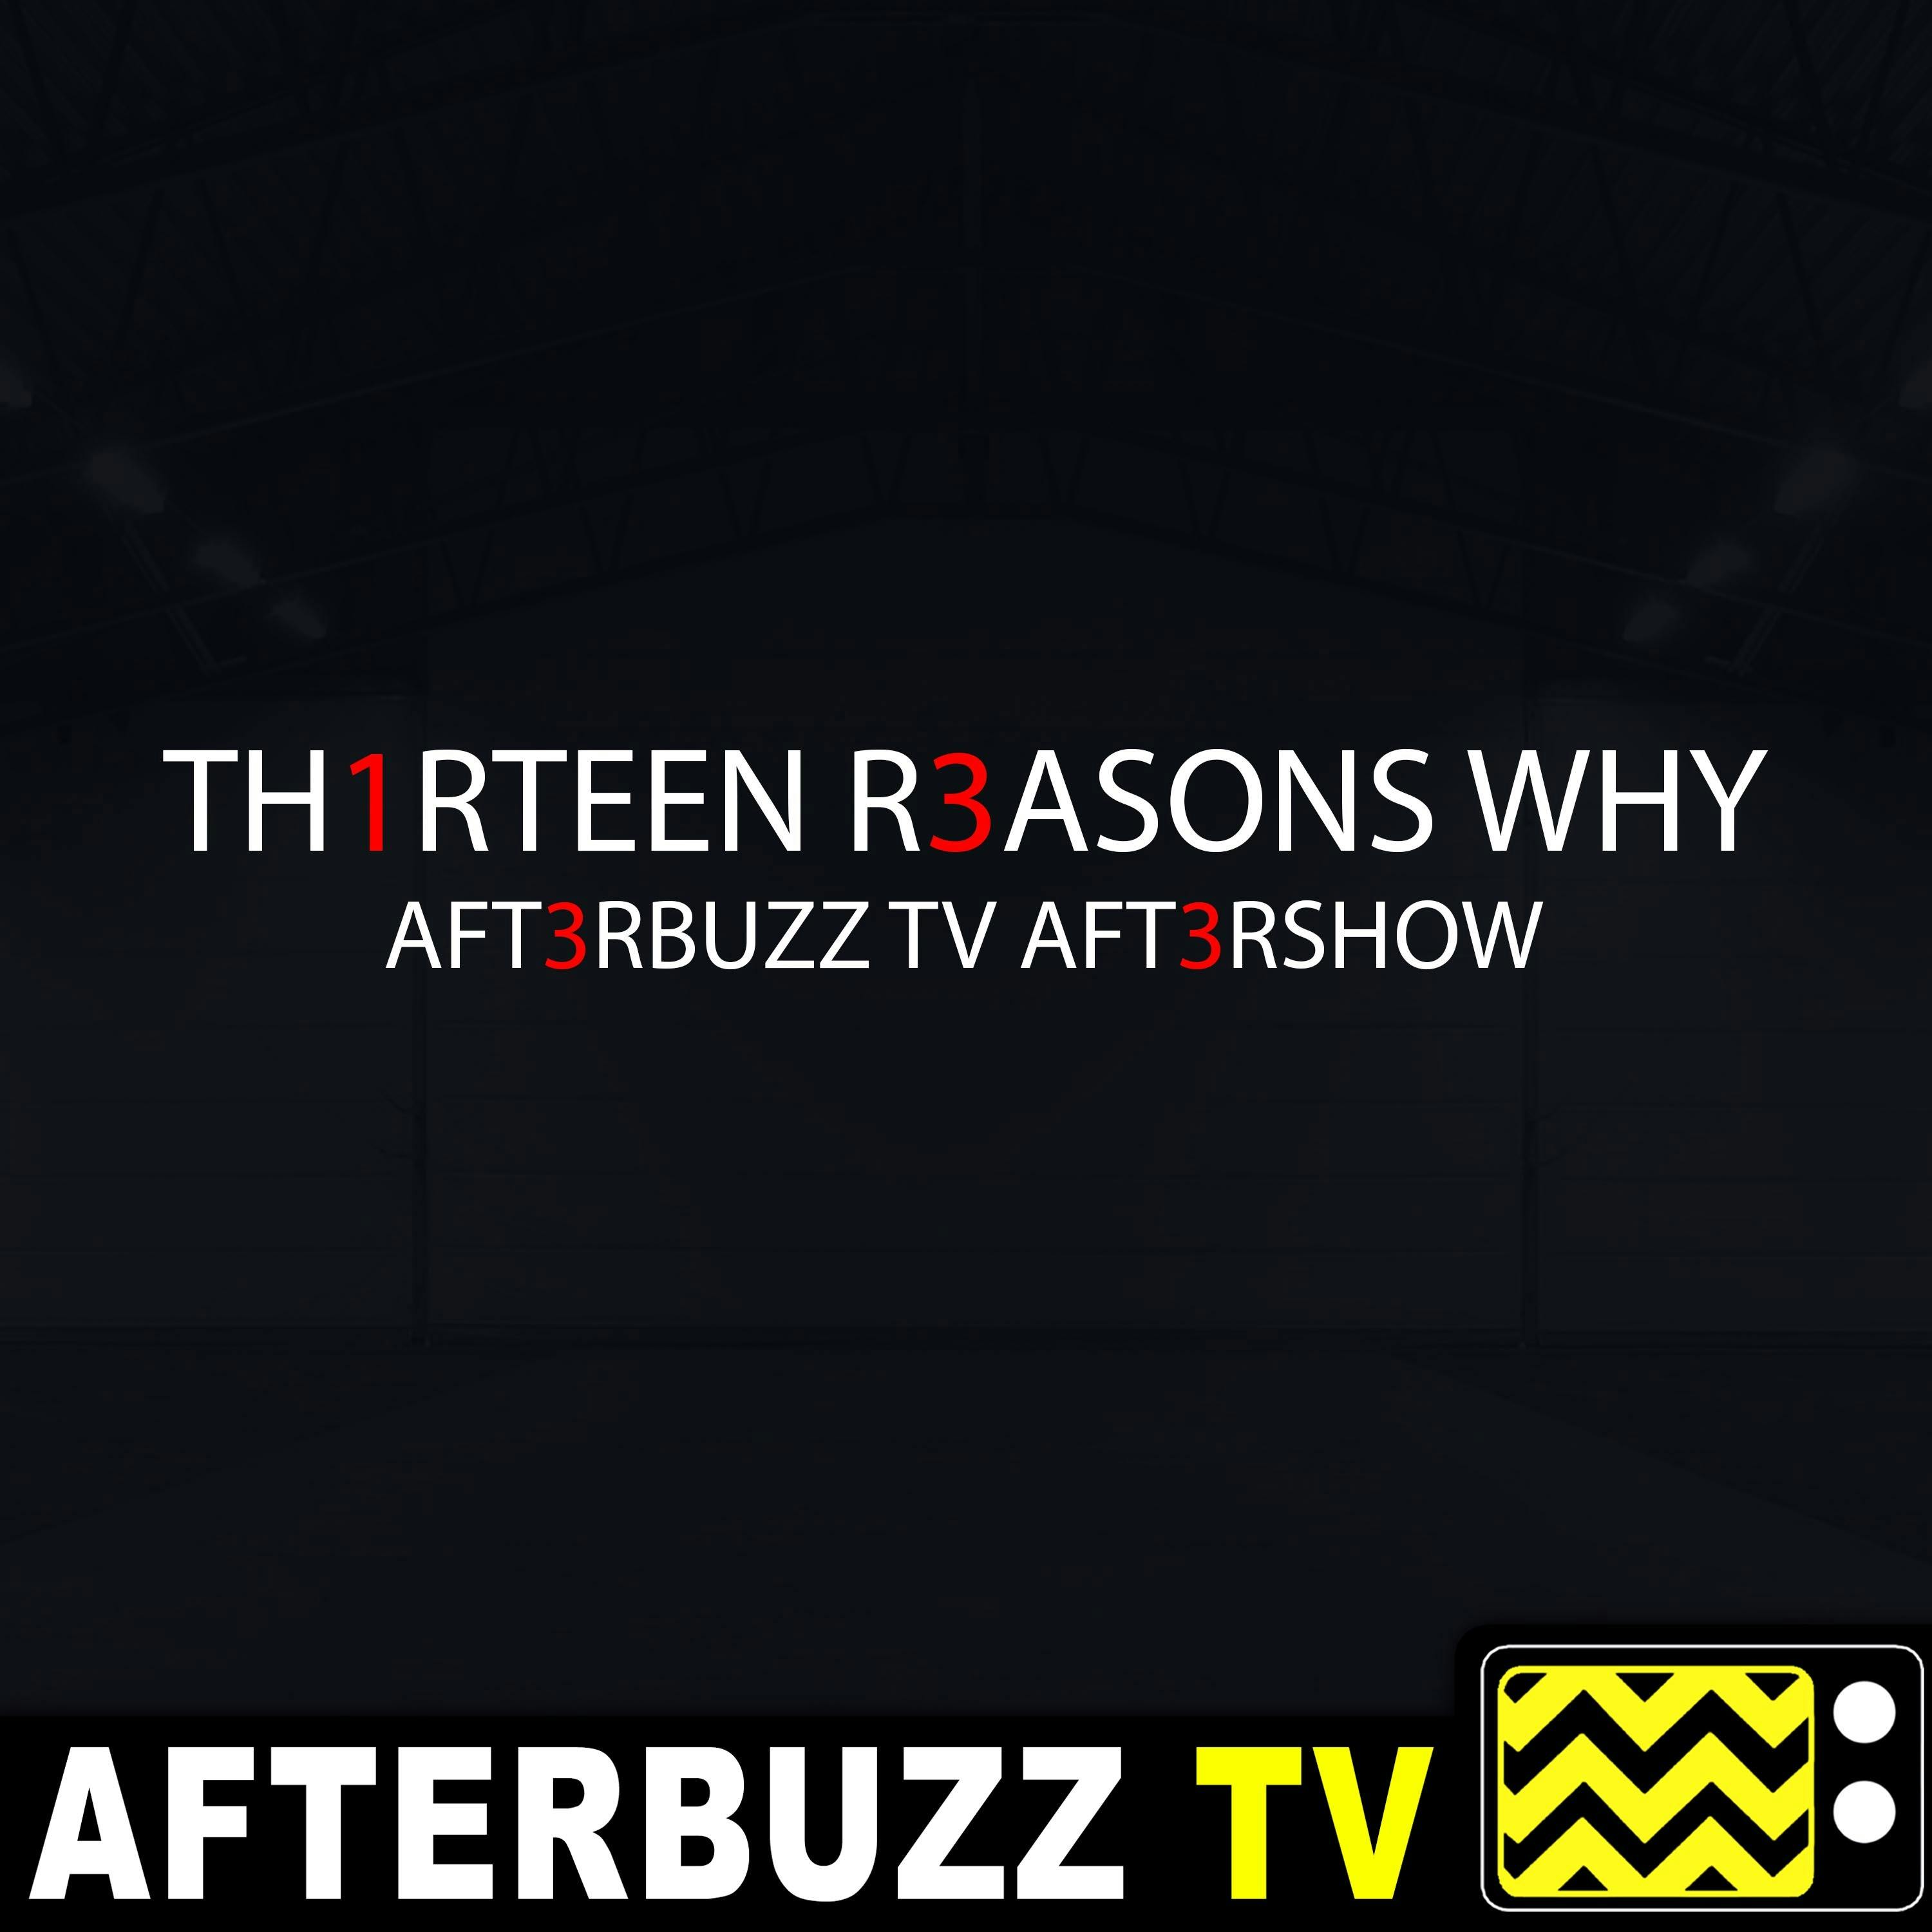 13 Reasons Why S:1 | Justin Prentice & Christian Navarro Guest on Tape 6, Side B; Tape 7, Side A E:12 & 13 | AfterBuzz TV AfterShow